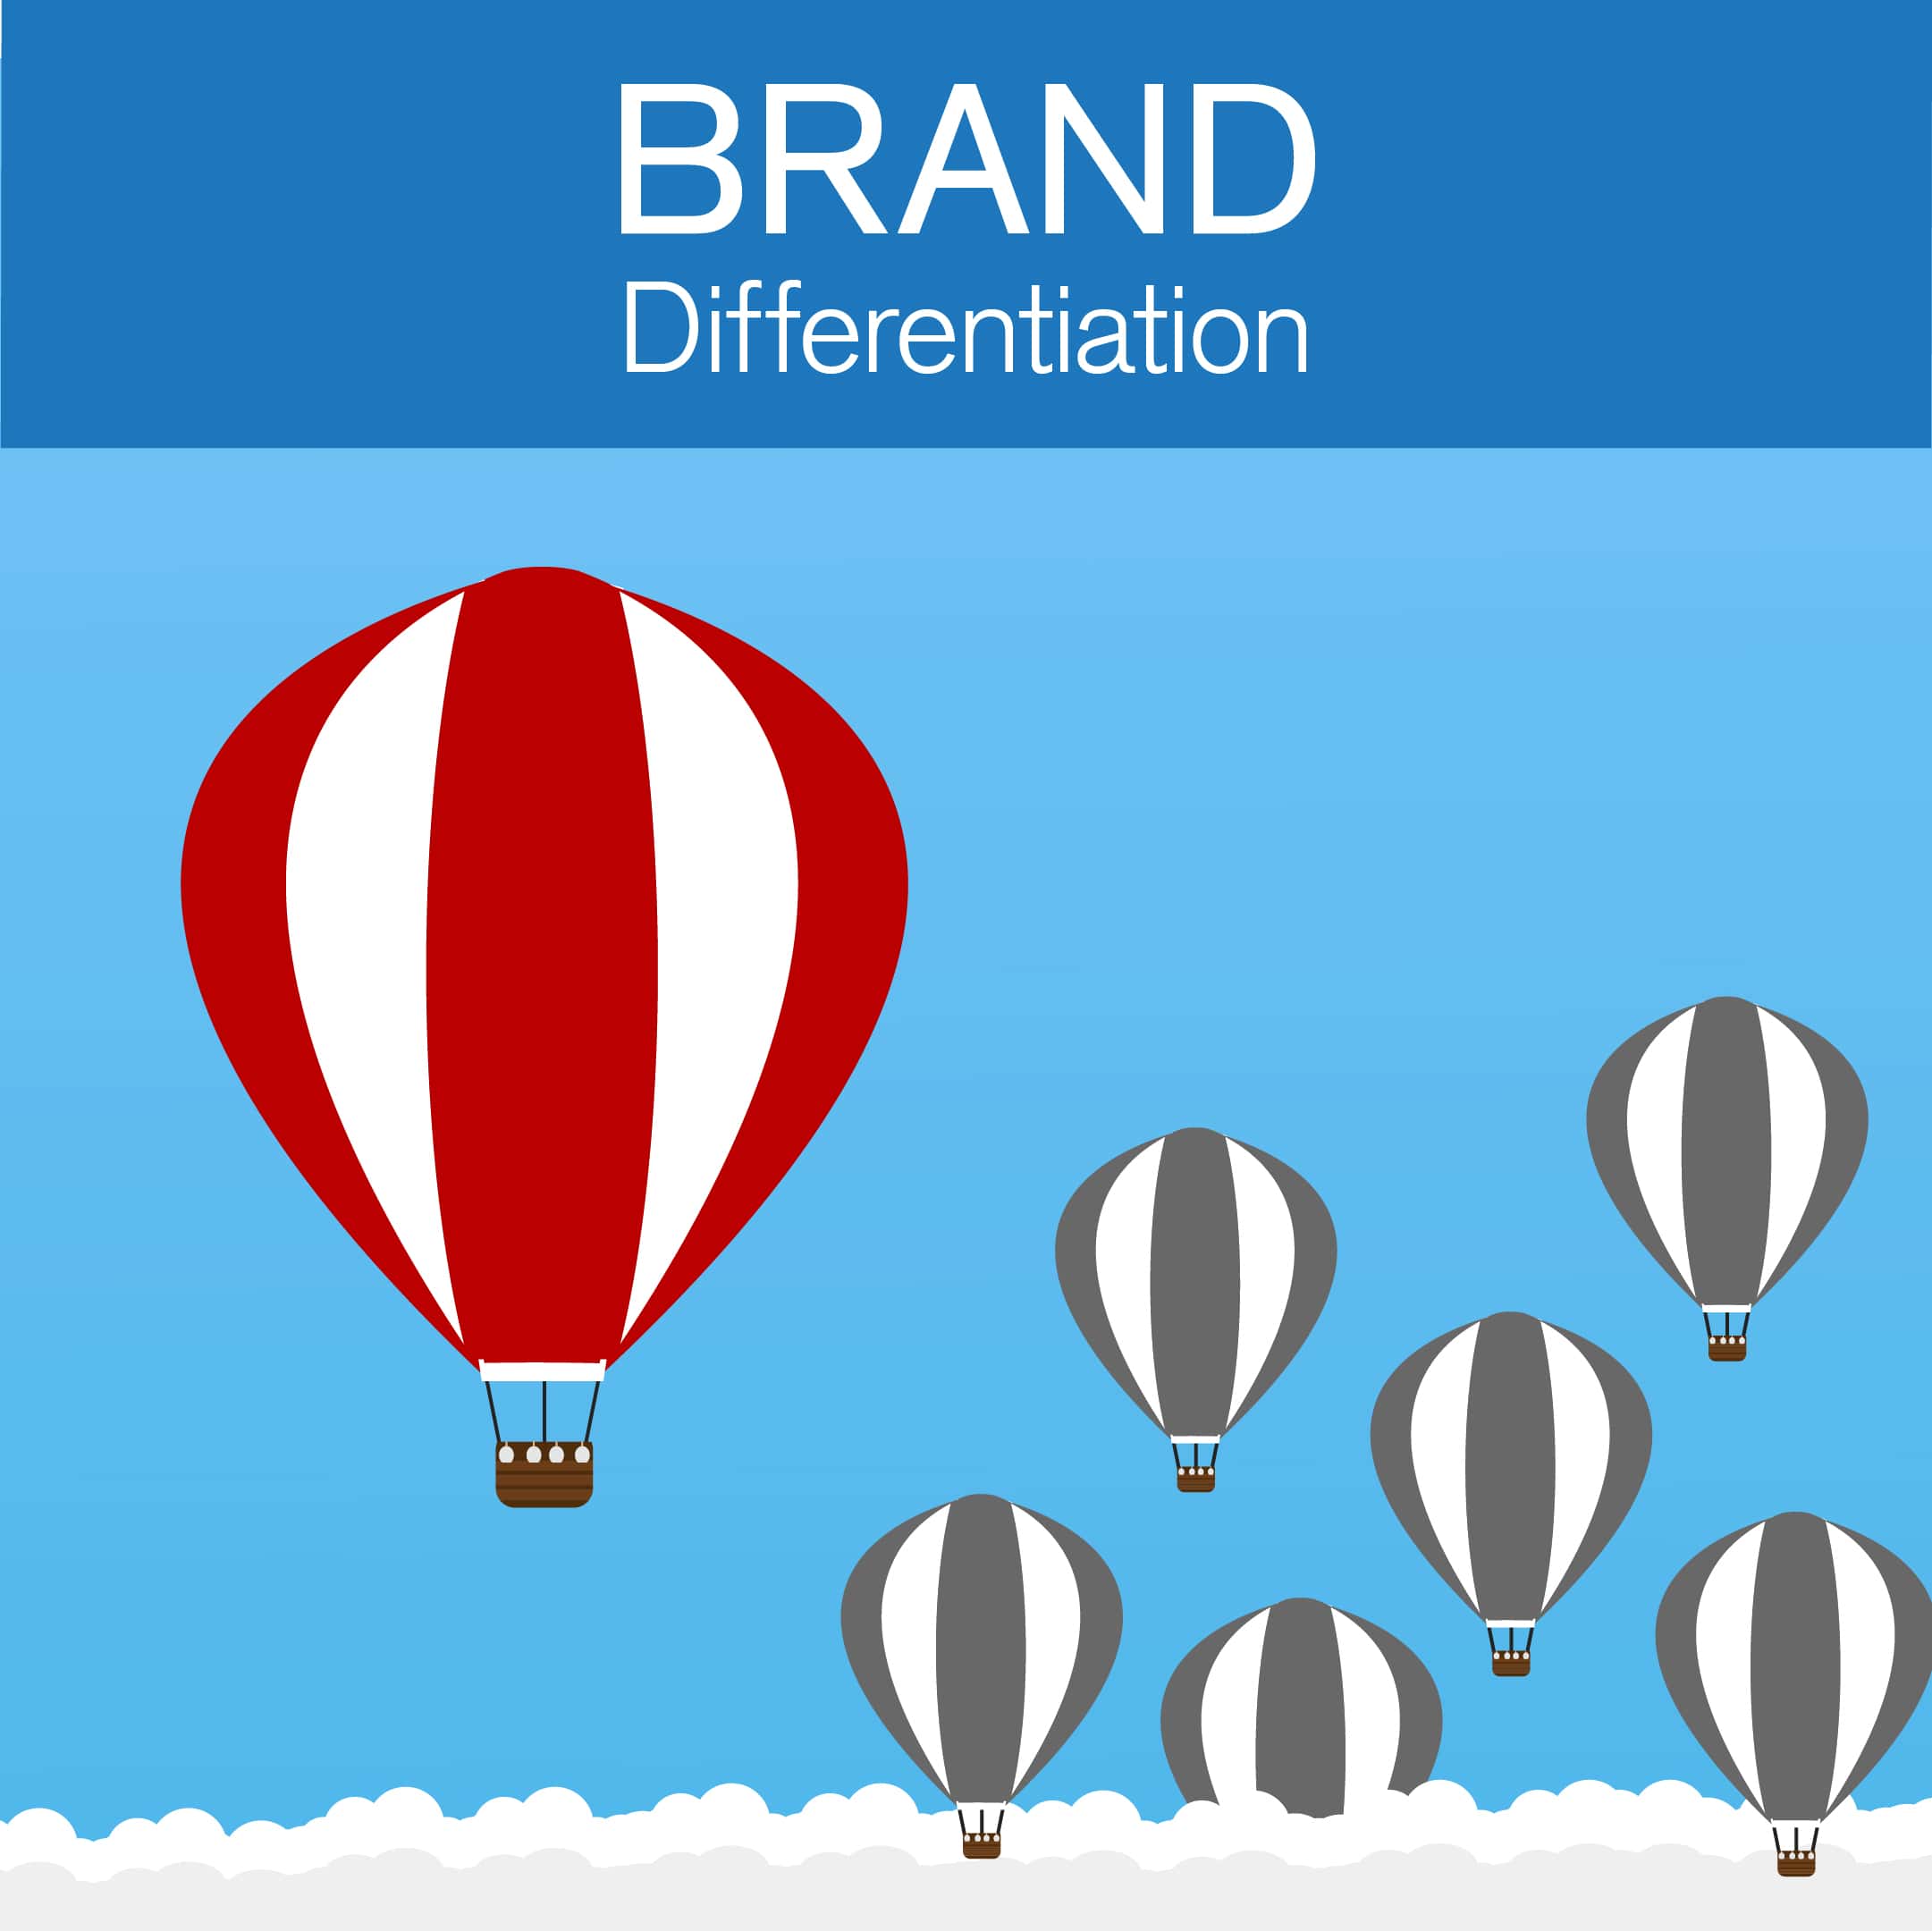 Brand Differentiation One-Minute Marketing Tips